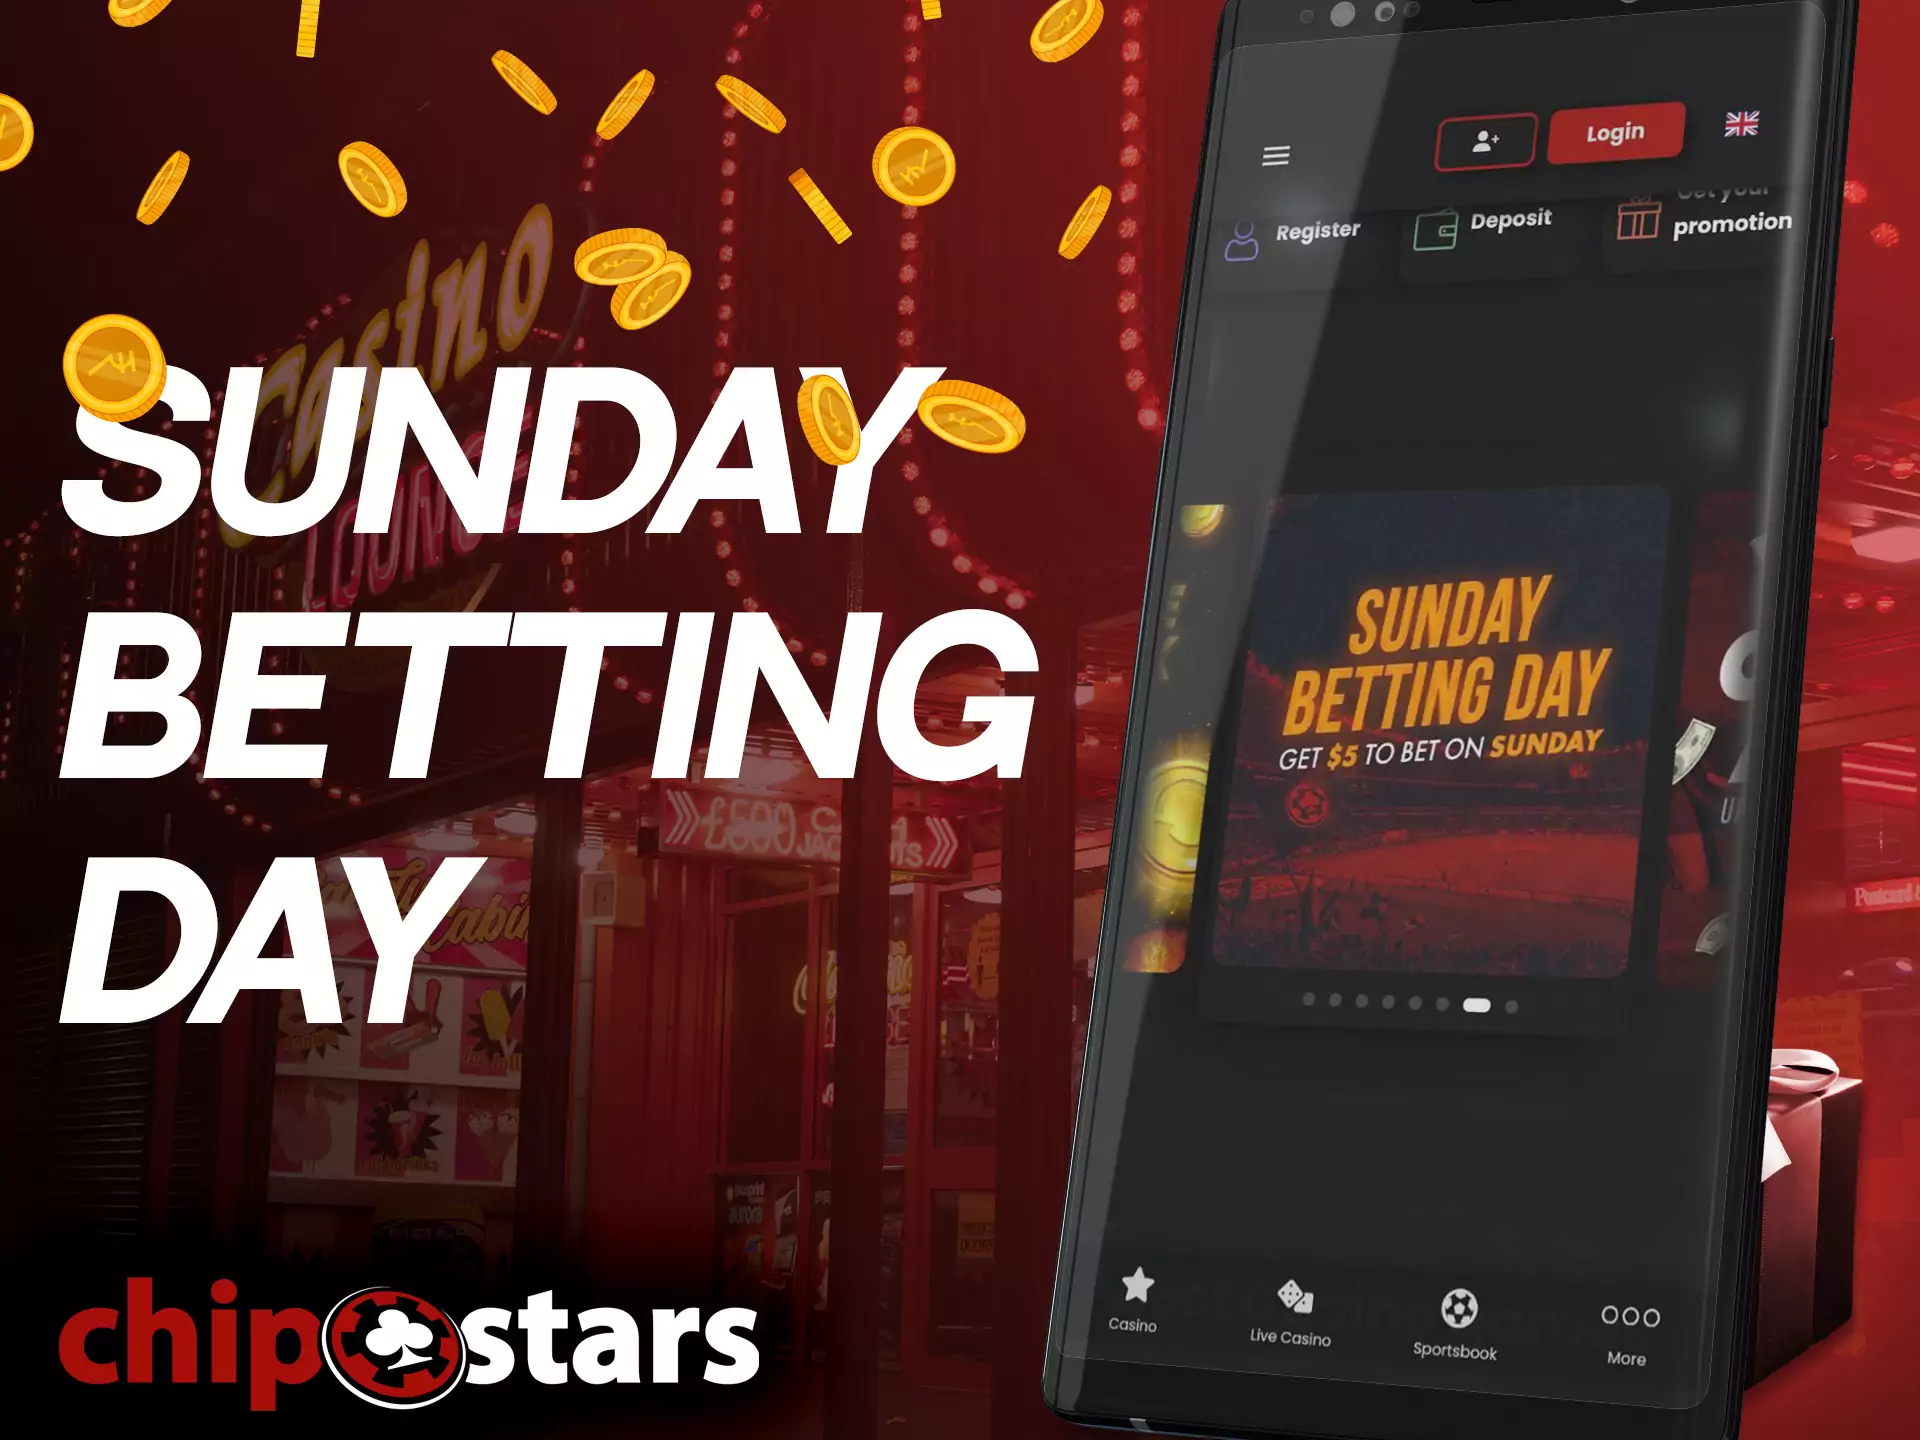 By making deposits on Sundays, users get additional bonuses from Chipstars.